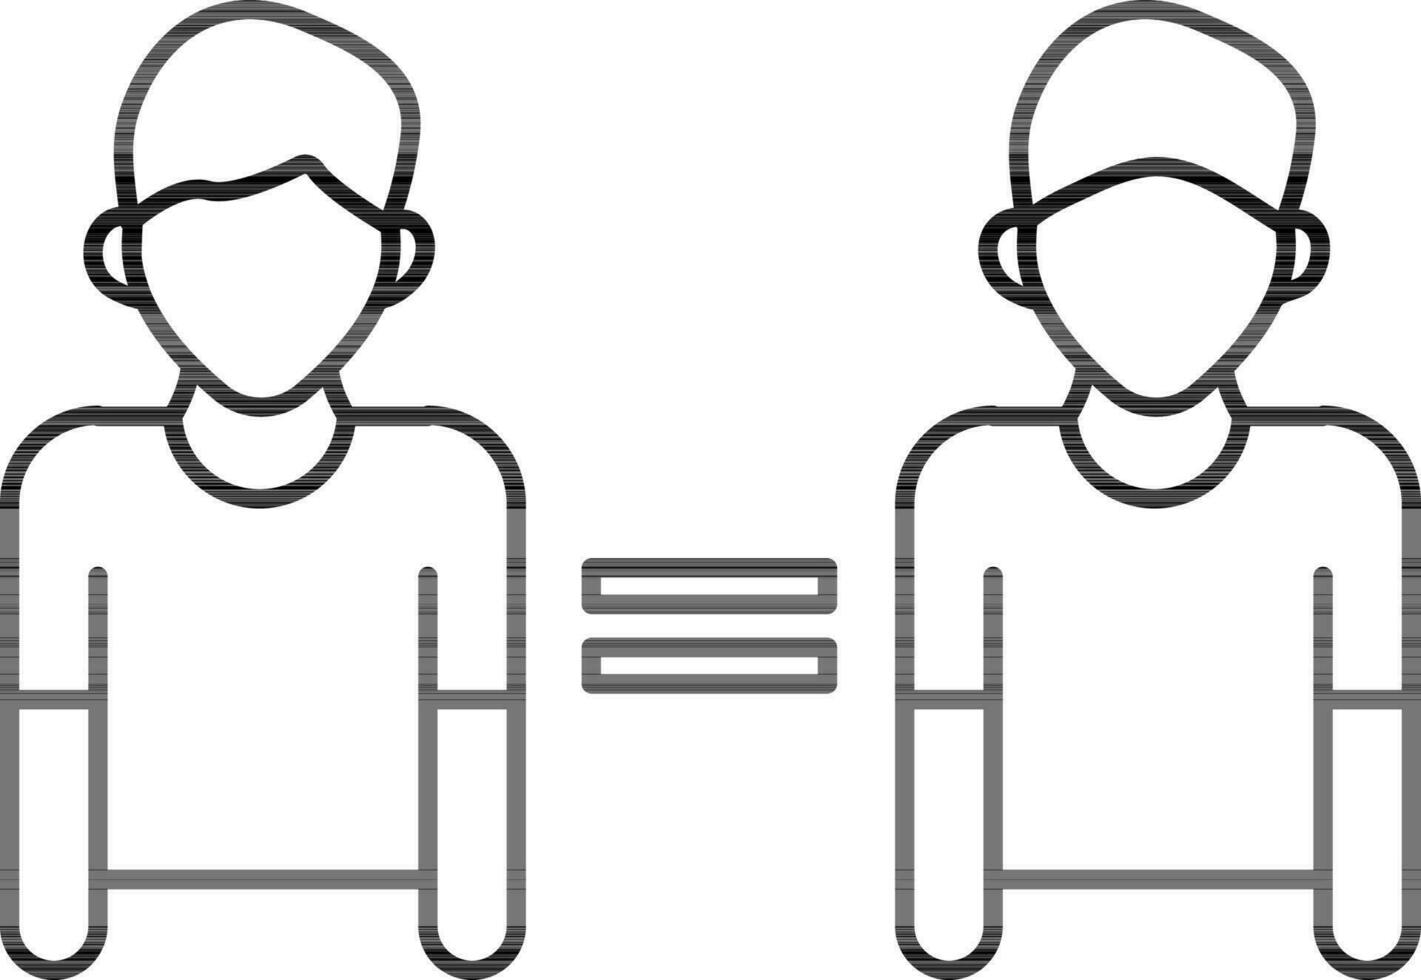 Equal people icon in line art. vector